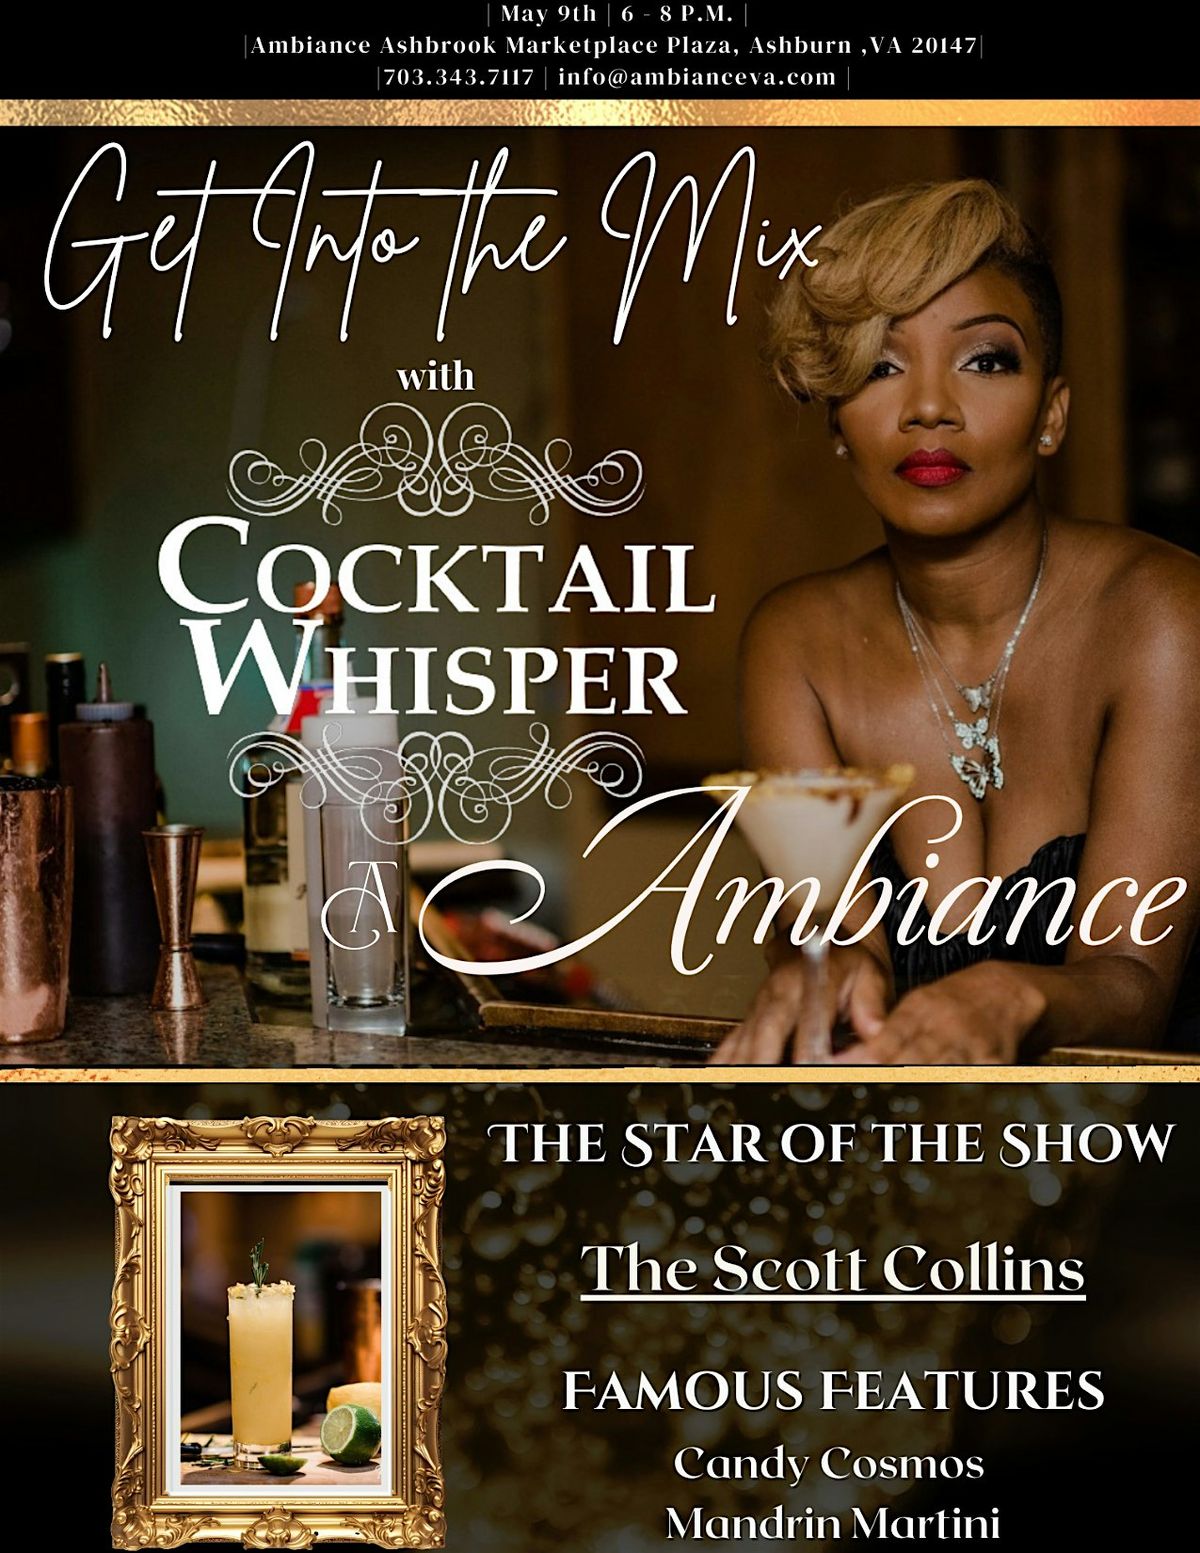 Experience the Art of Mixology with Cocktail Whisper @Ambiance!